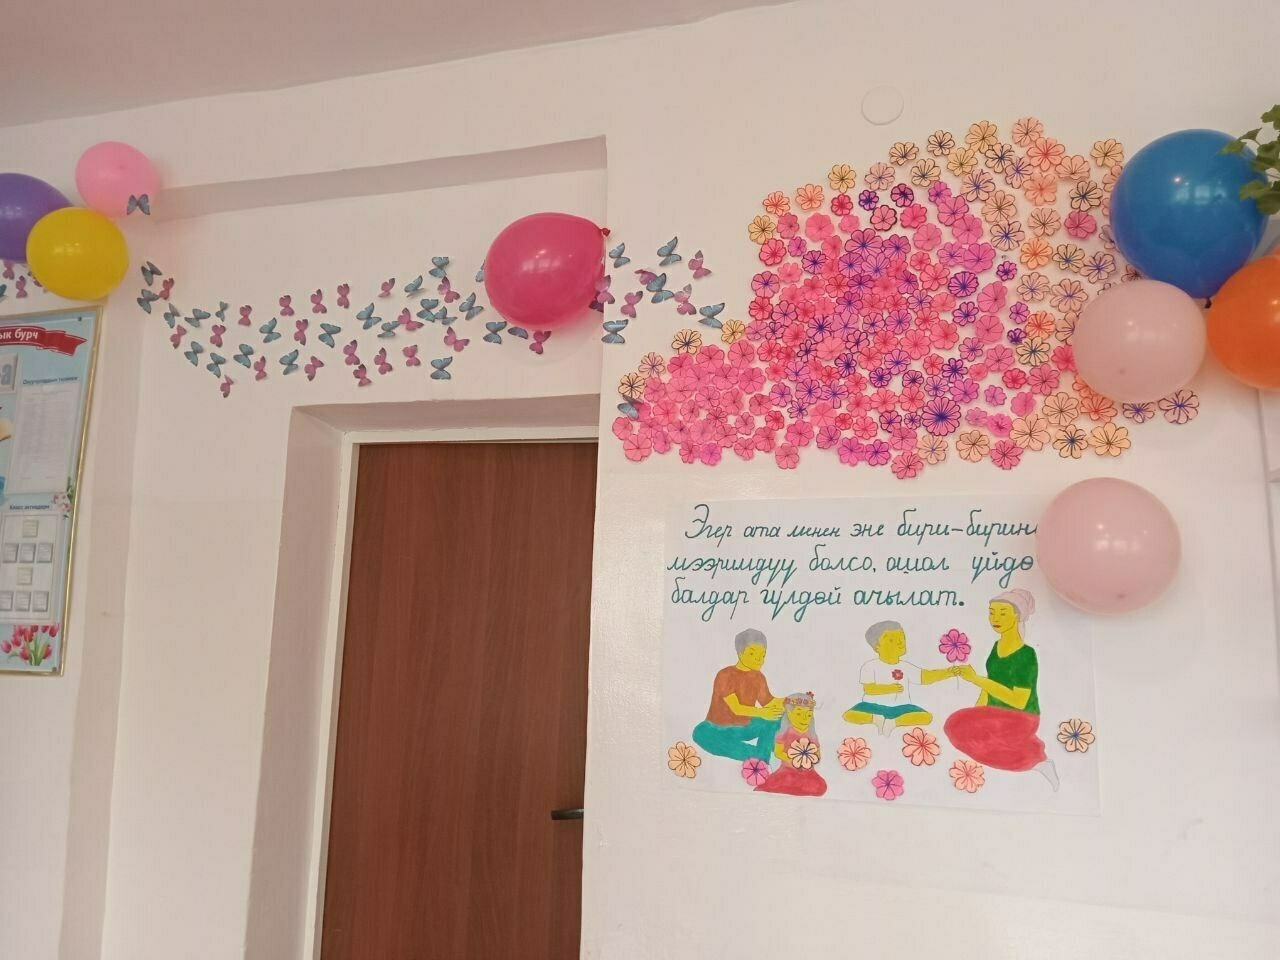 trail of colorful paper butterflies and flowers on a classroom wall above the door; colorful balloons hanging on the wall and a poster painted with a picture of a family and some Kyrgyz words on it also on the wall 